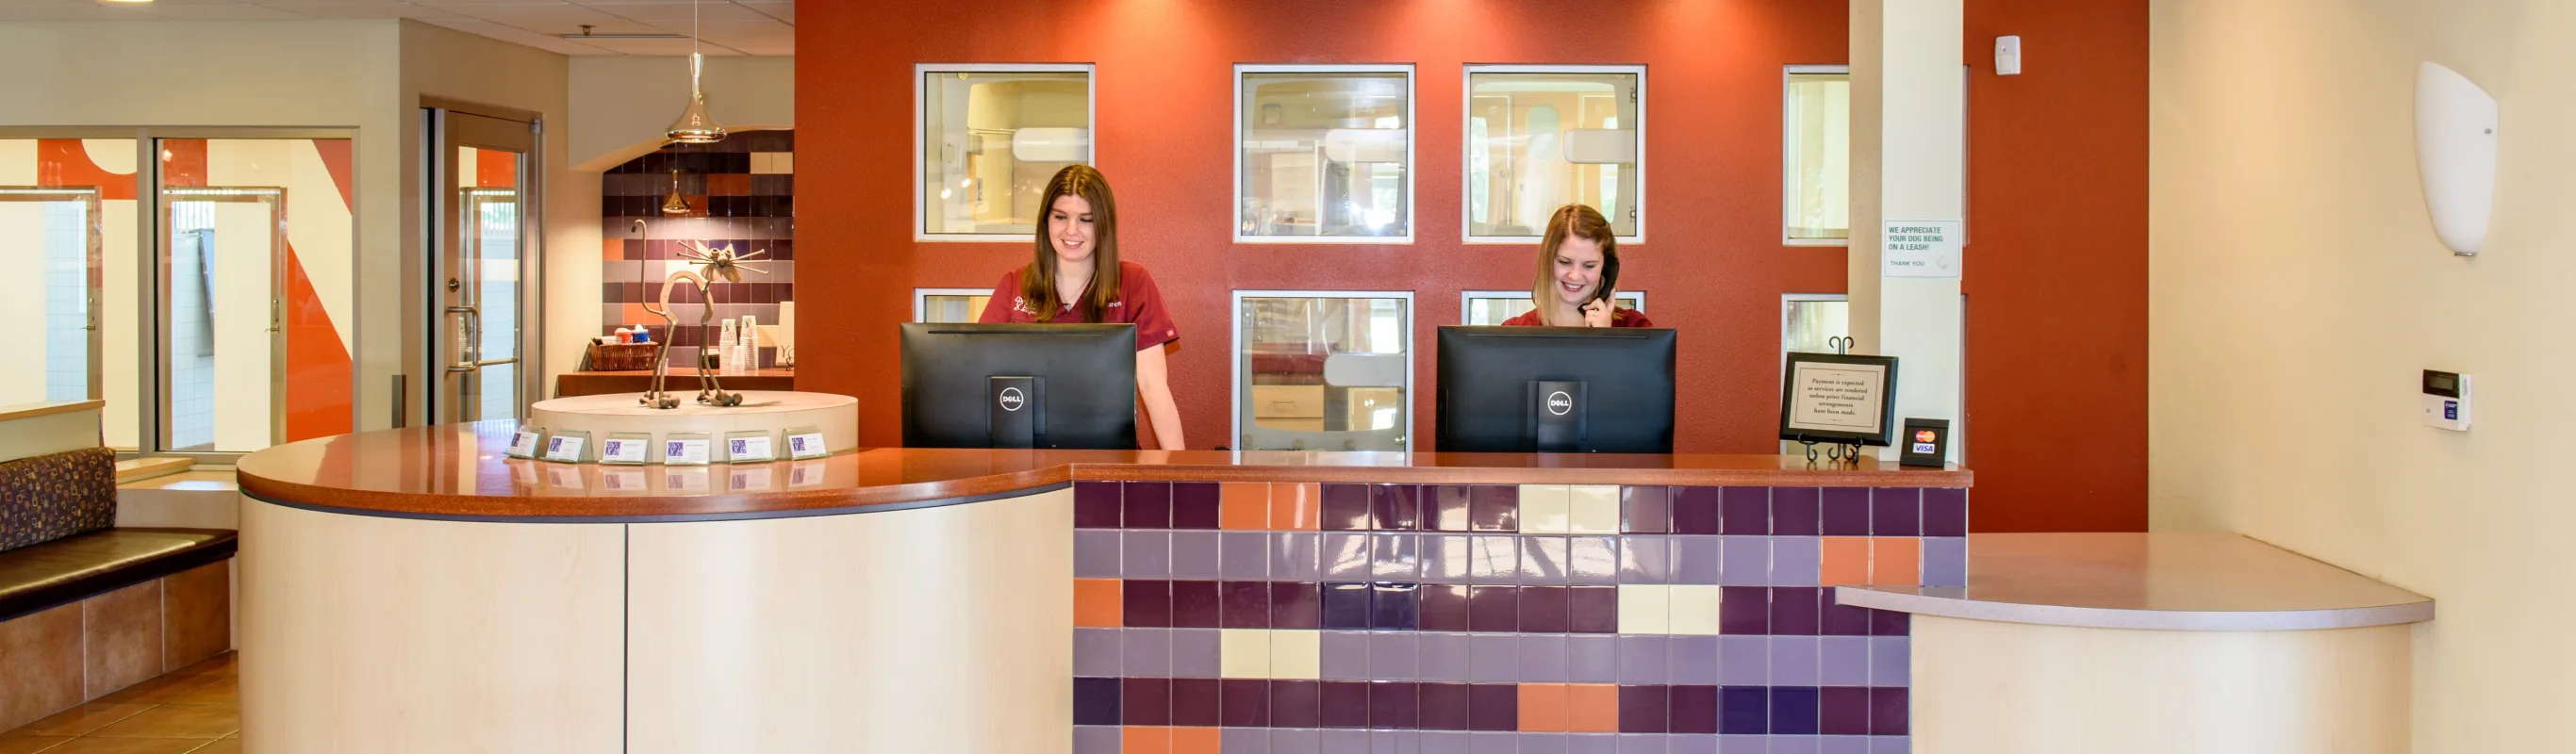 Front Reception desk with purple and orange coloring at South Suburban Animal Hospital